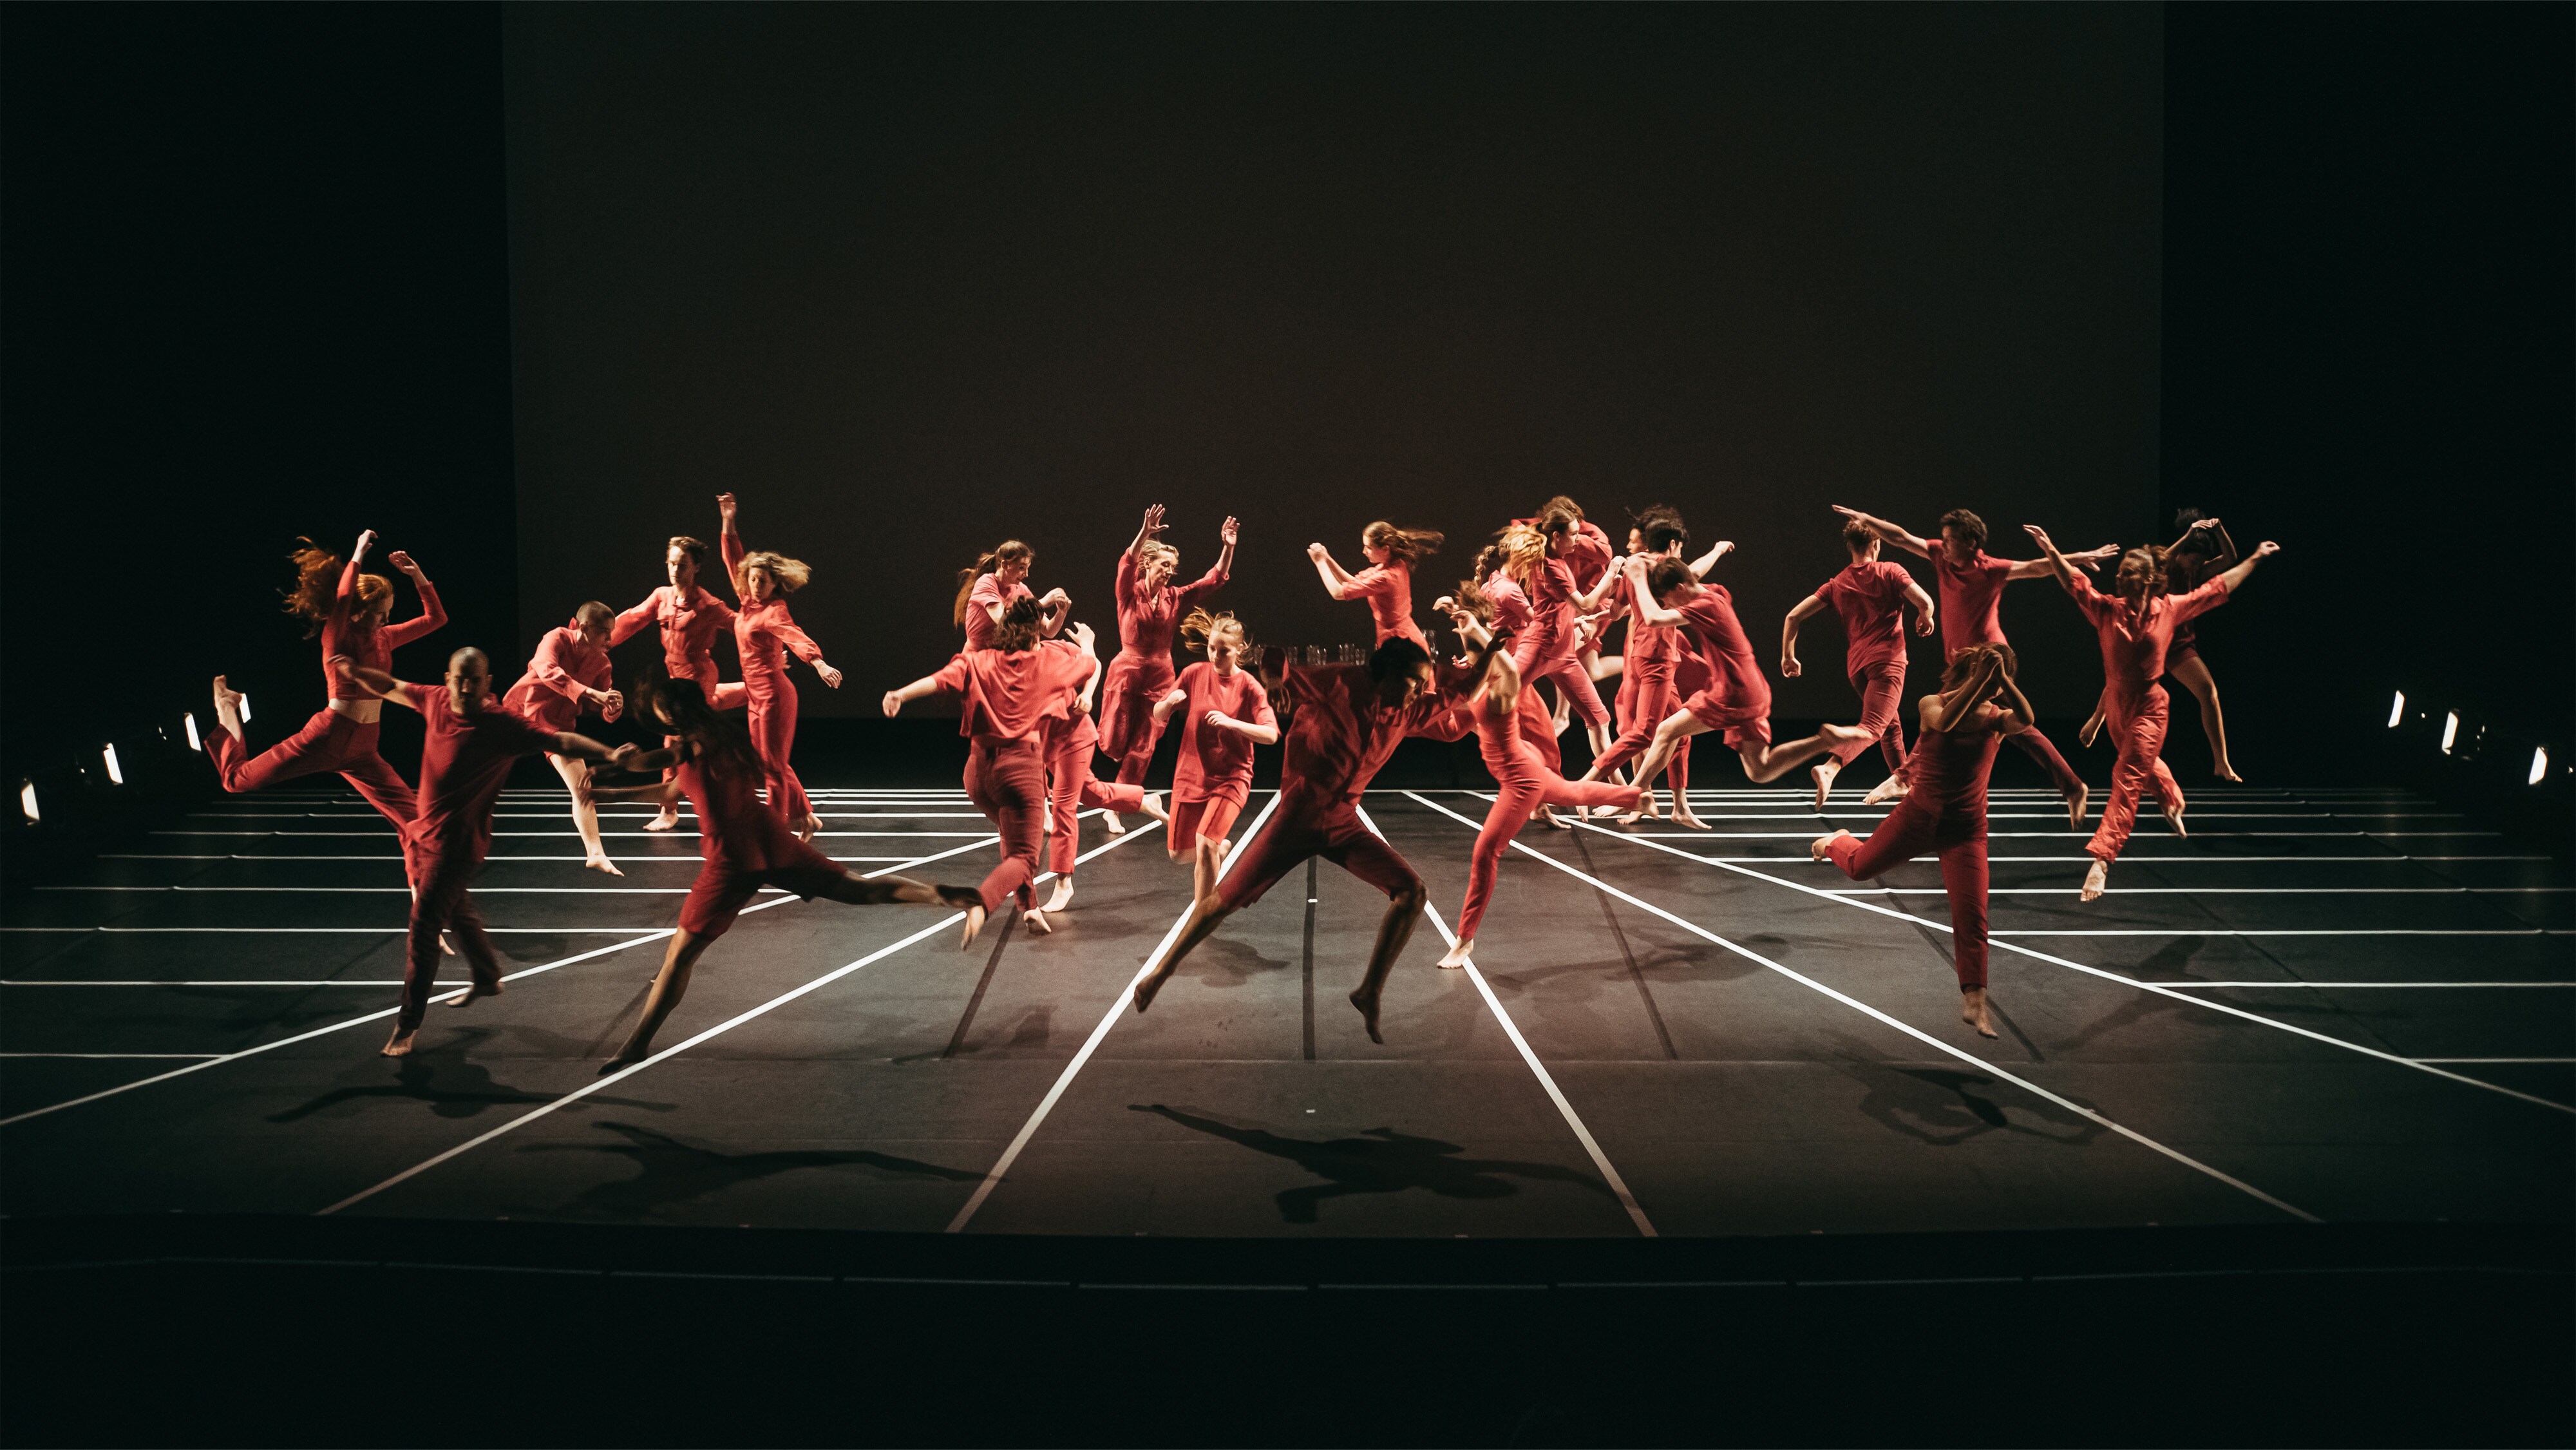 Jumping dancers, in the piece Red Notes, choreographed by Andy de Groat